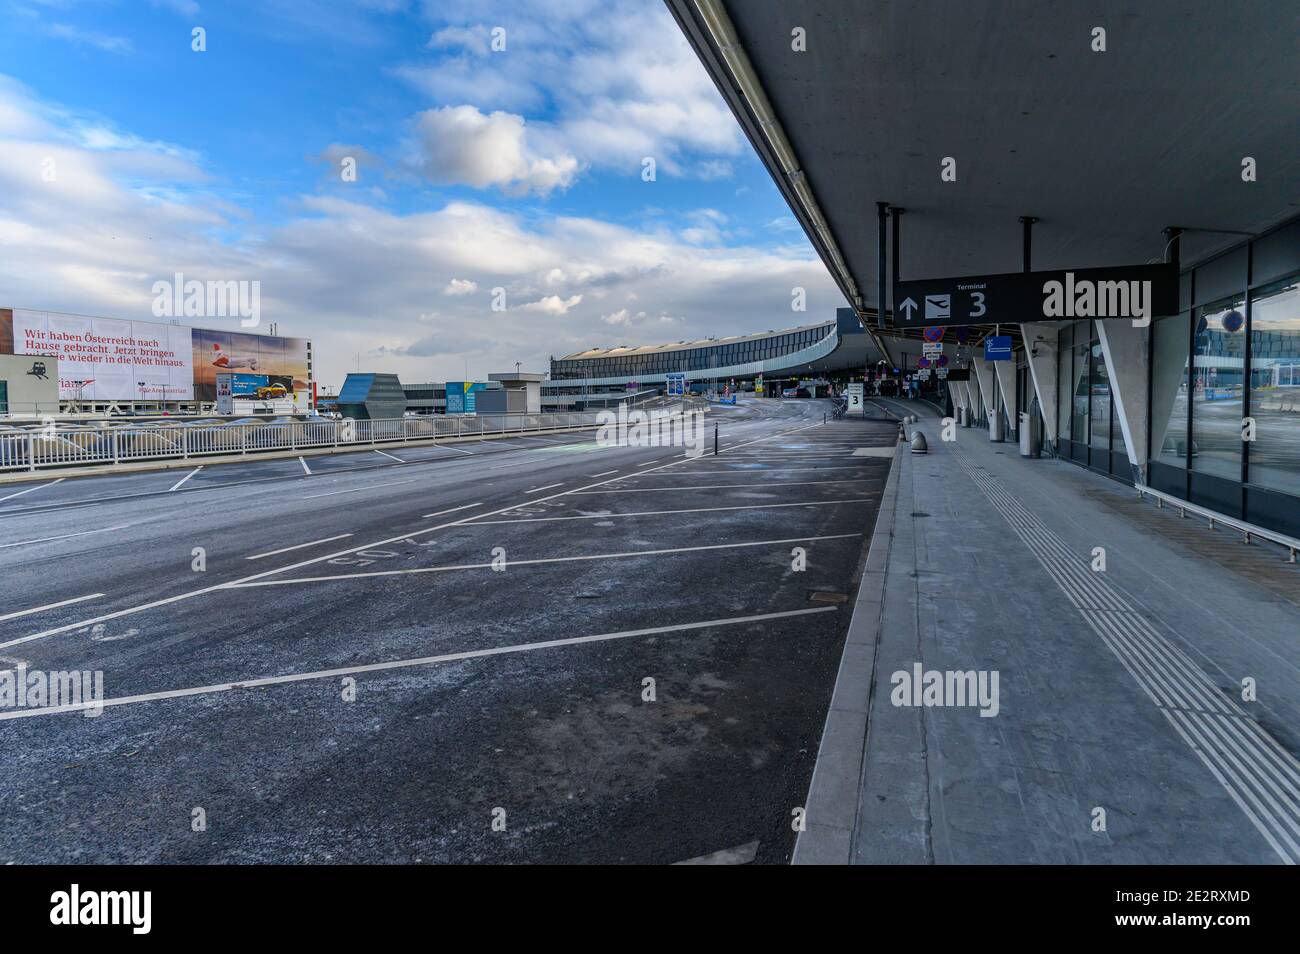 schwechat, austria, 13 jan 2021, empty car park at the vienna international airport during the covid-19 lockdown Stock Photo